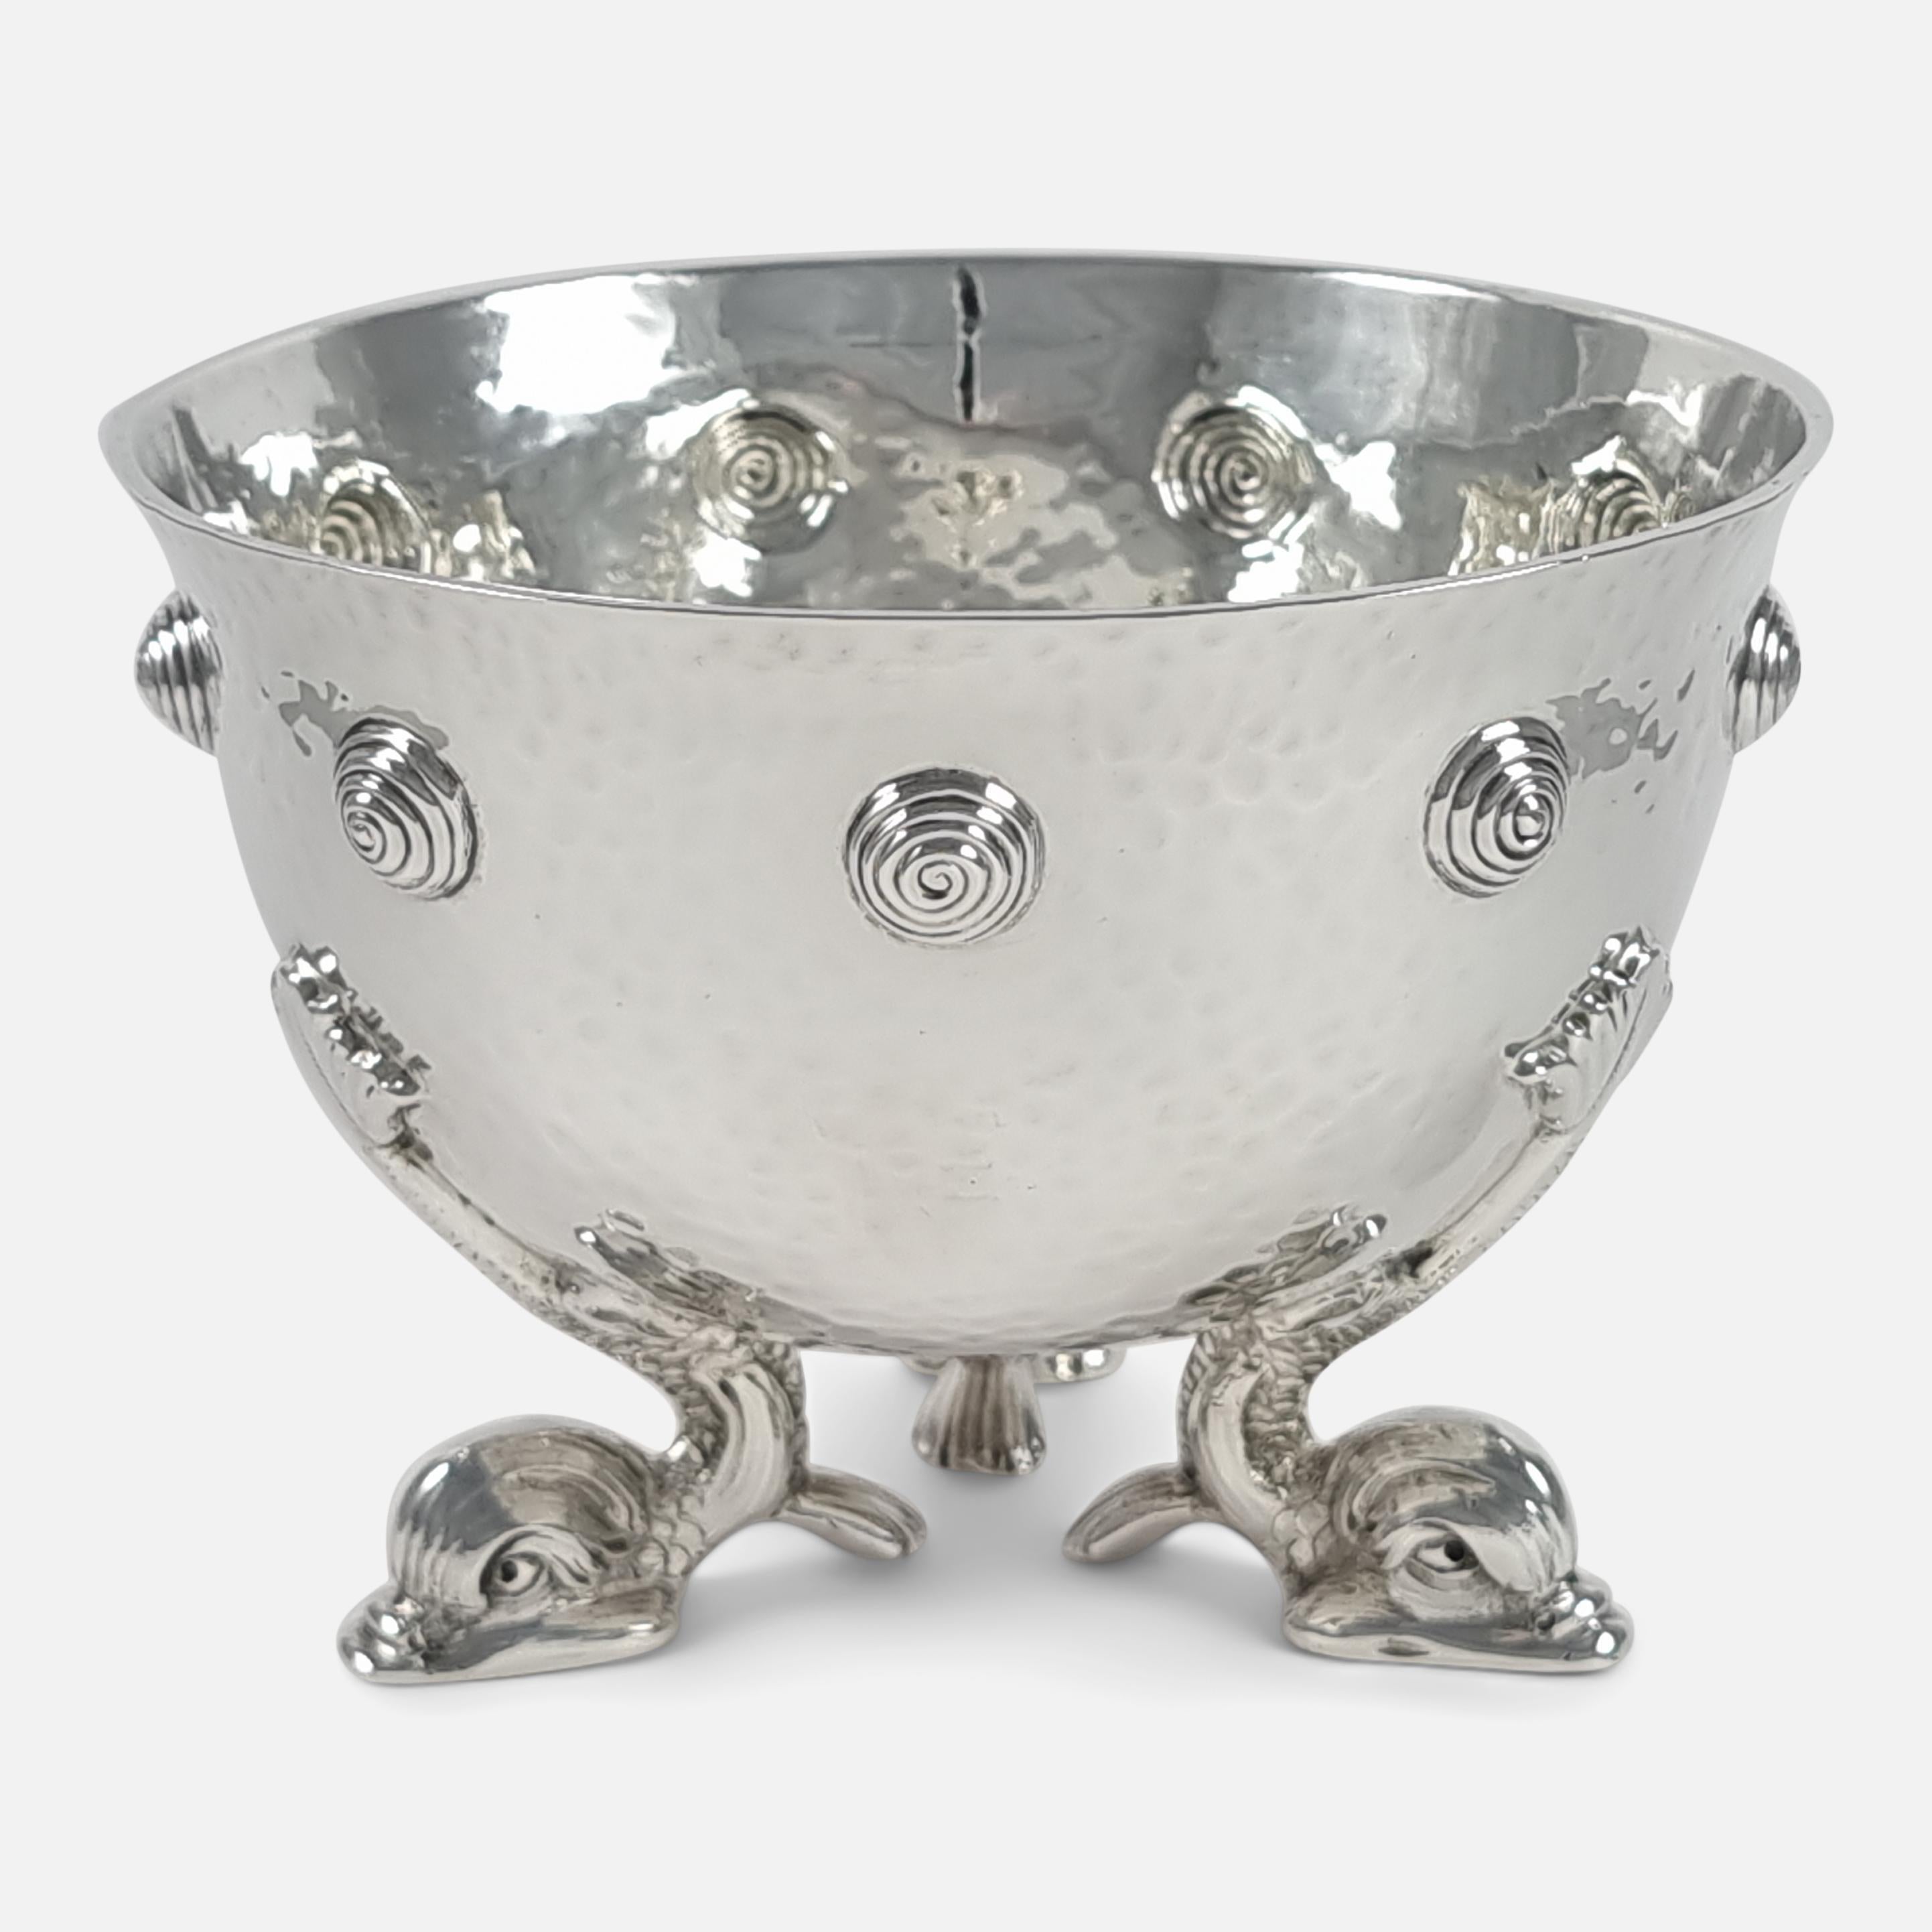 An Edward VII sterling silver Arts & Crafts style bowl by Mappin & Webb, London, 1906. The bowl is of circular form, with spot-hammered decoration, a band of punched spiral beads to the body, and sitting on three mythical dolphin feet.

Assay: -